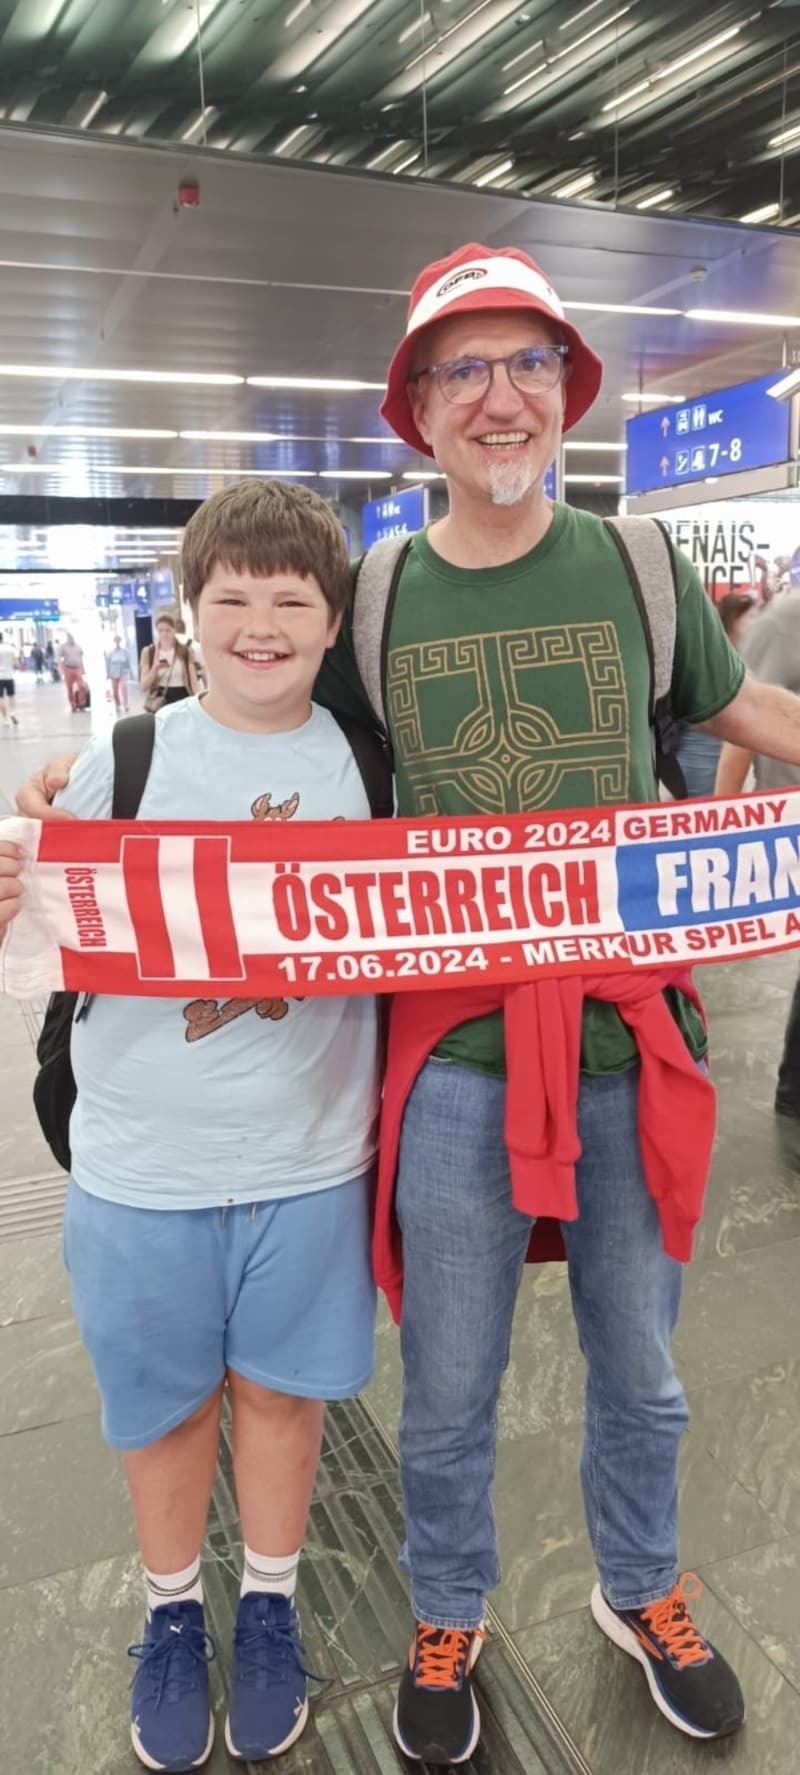 Dad and son arrived back at the main station on Tuesday afternoon. They brought a scarf with them as a souvenir. They will never forget this trip for the rest of their lives. (Bild: Zur Verfügung gestellt)